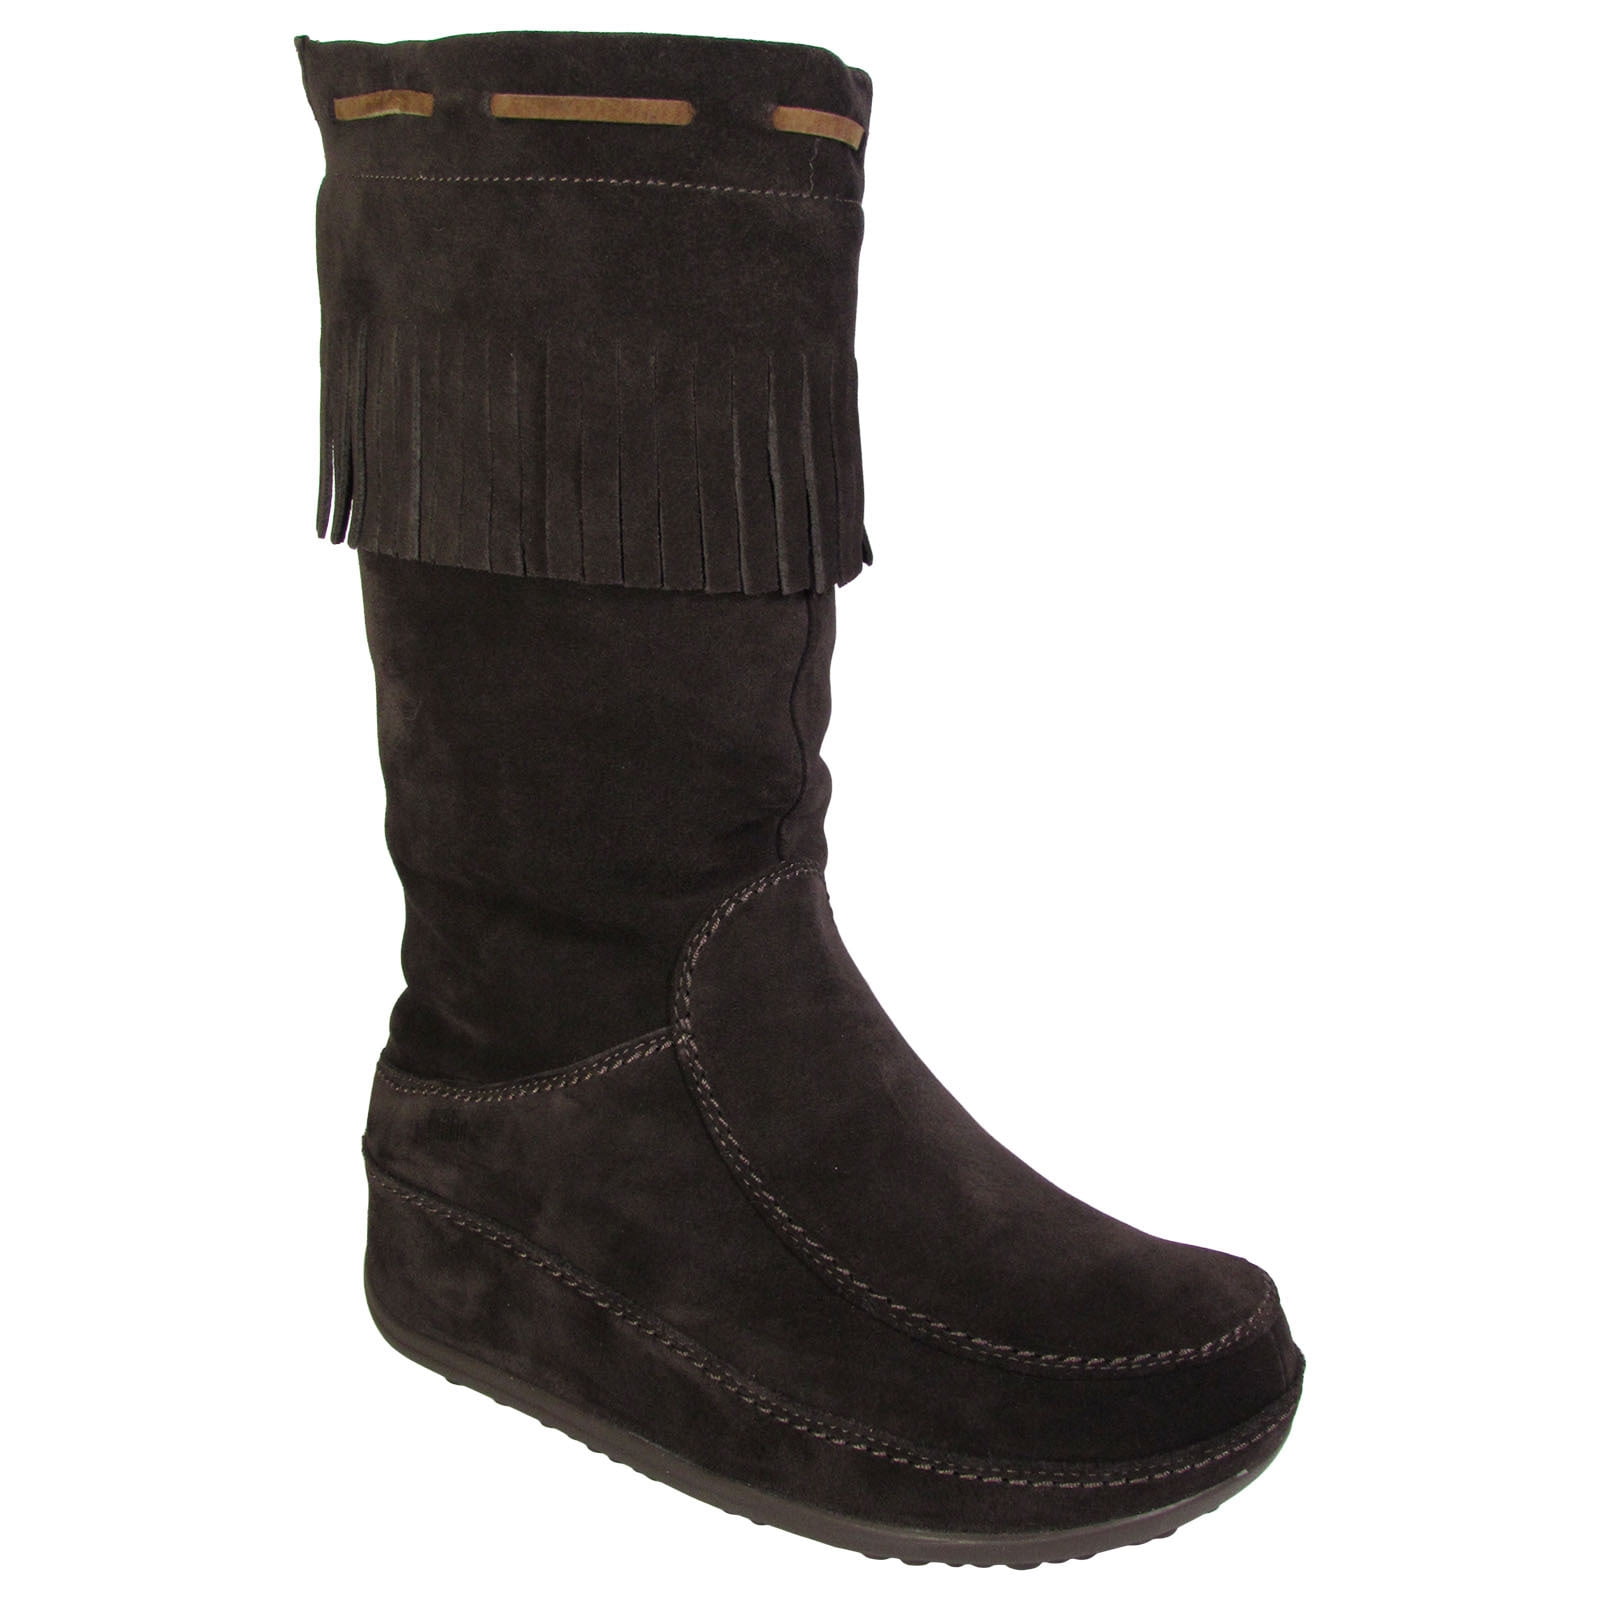 FitFlop - FitFlop Womens Superfringe Mukluk Suede Boots - Walmart.com ...